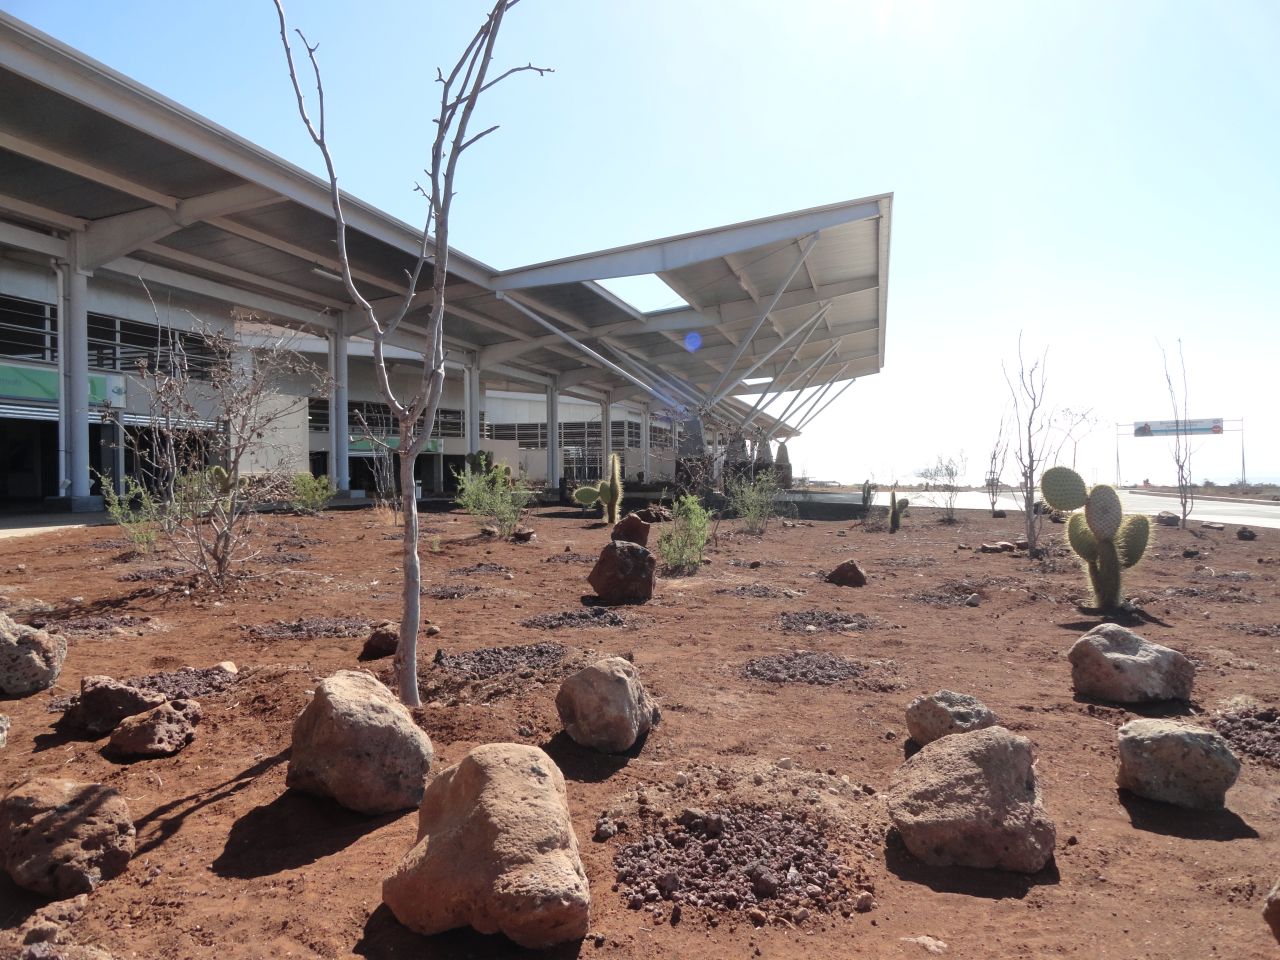 Endemic plants are dotted around the entrance of the 64,000-square-foot building, which required a $40 million investment and was built using sustainable construction. 